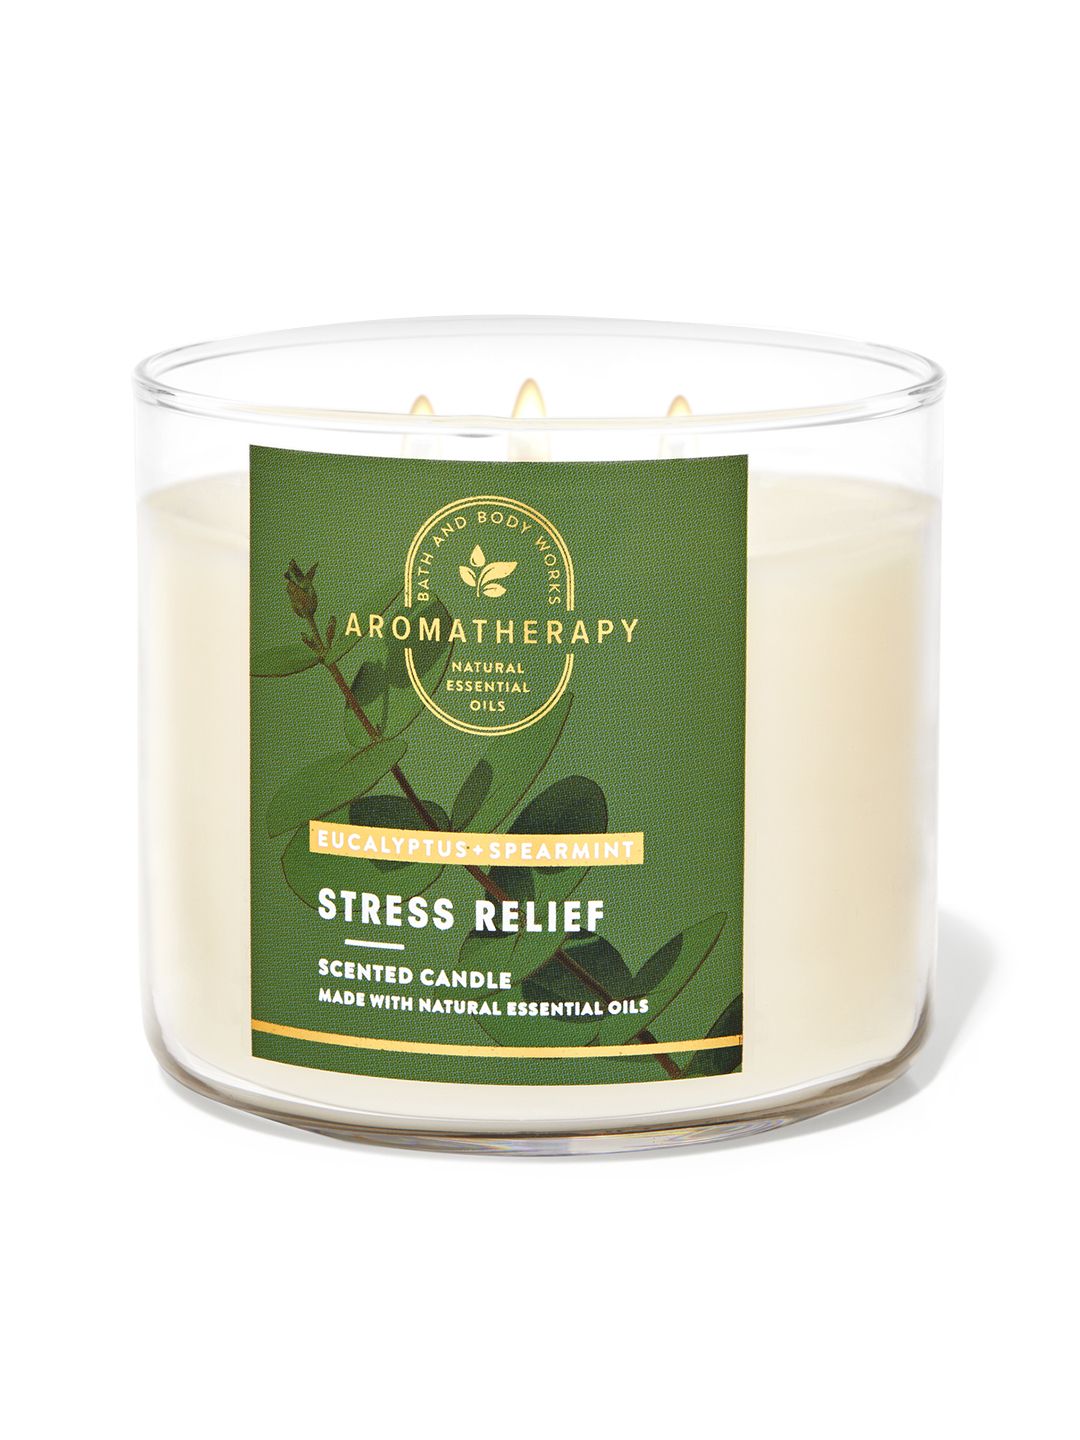 Bath & Body Works Aromatherapy Stress Relief Eucalyptus Spearmint 3-Wick Scented Candle Price in India